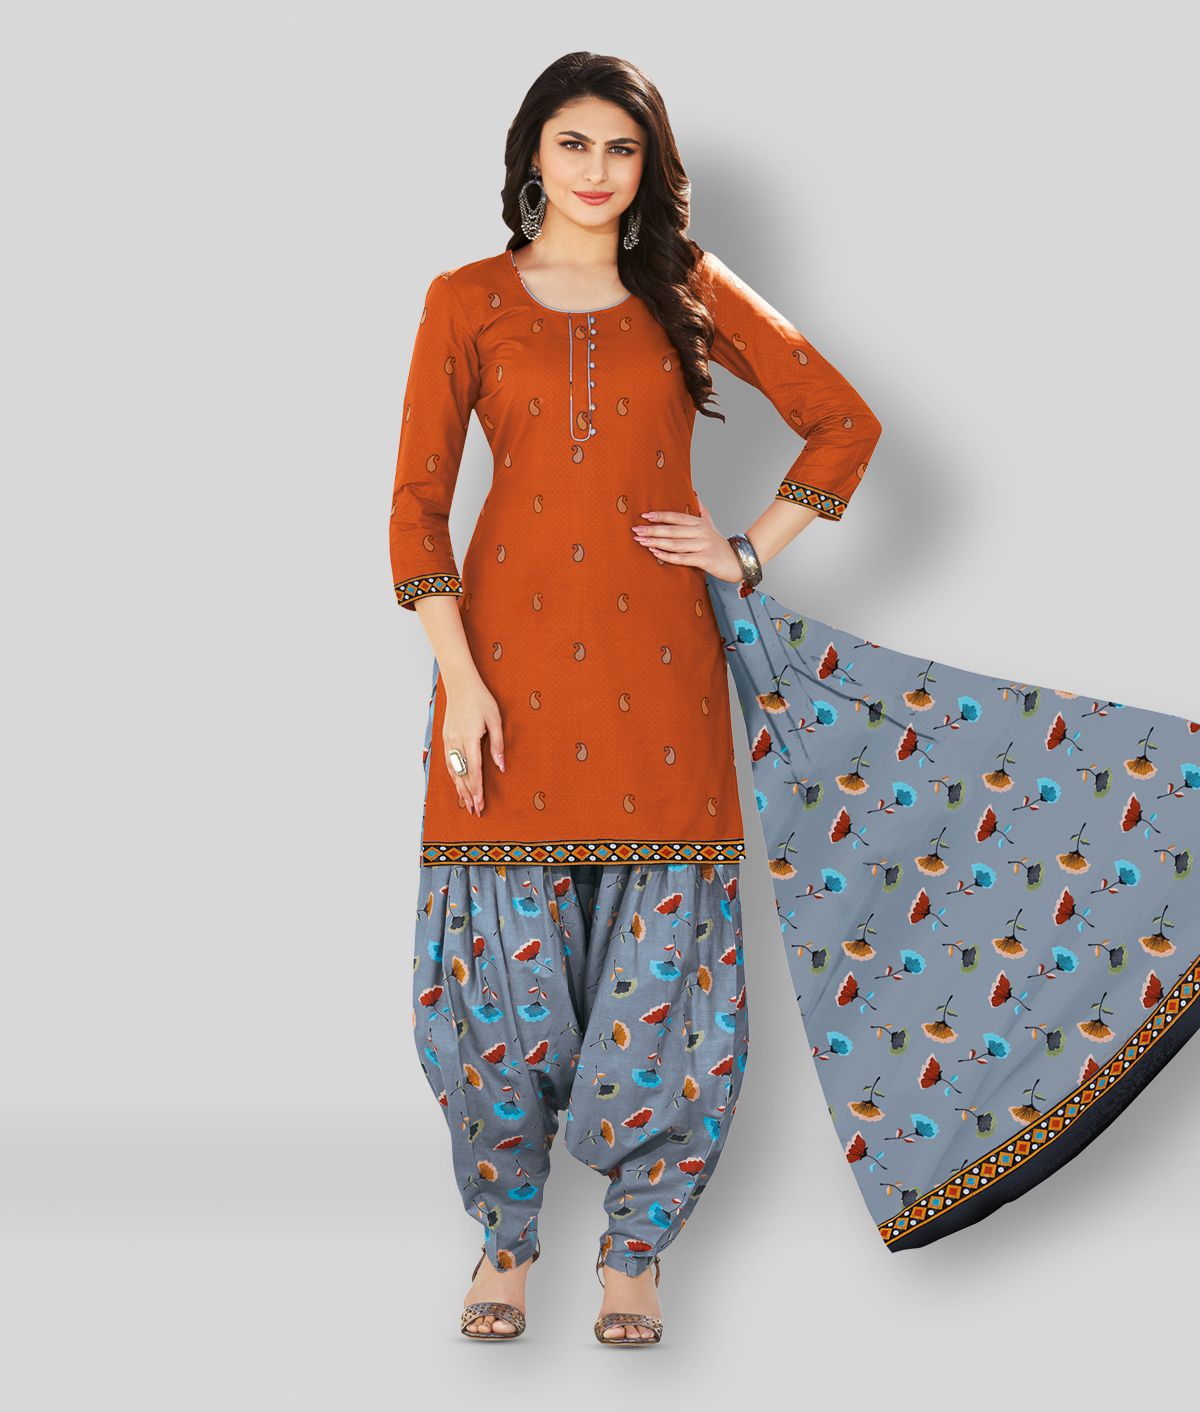     			shree jeenmata collection - Rust Straight Cotton Women's Stitched Salwar Suit ( Pack of 1 )